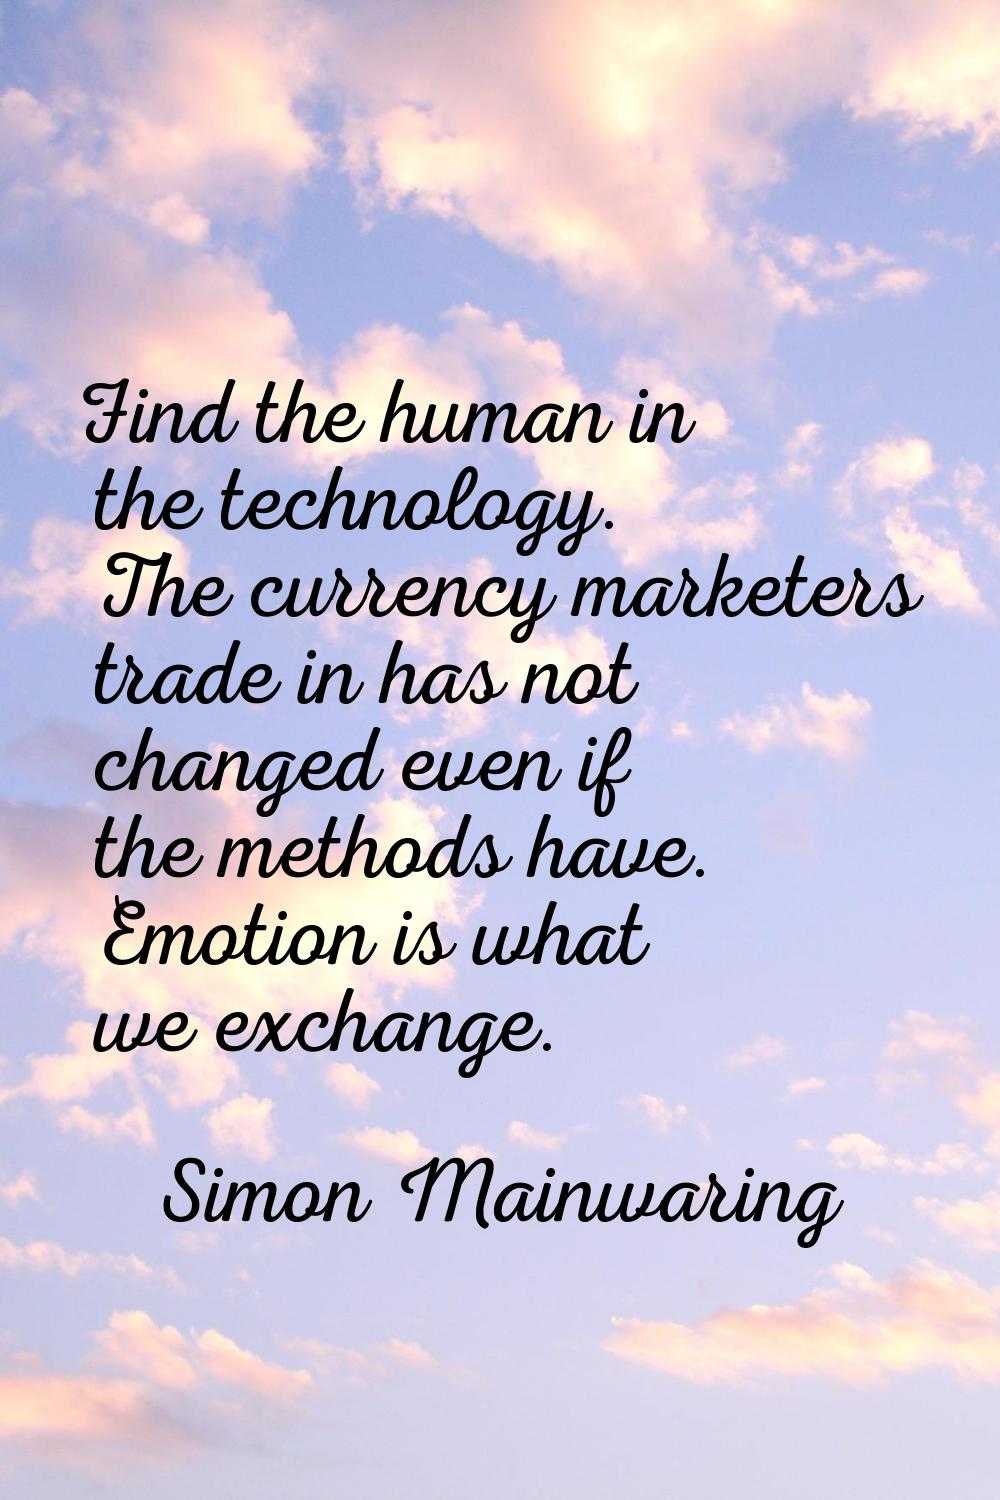 Find the human in the technology. The currency marketers trade in has not changed even if the metho